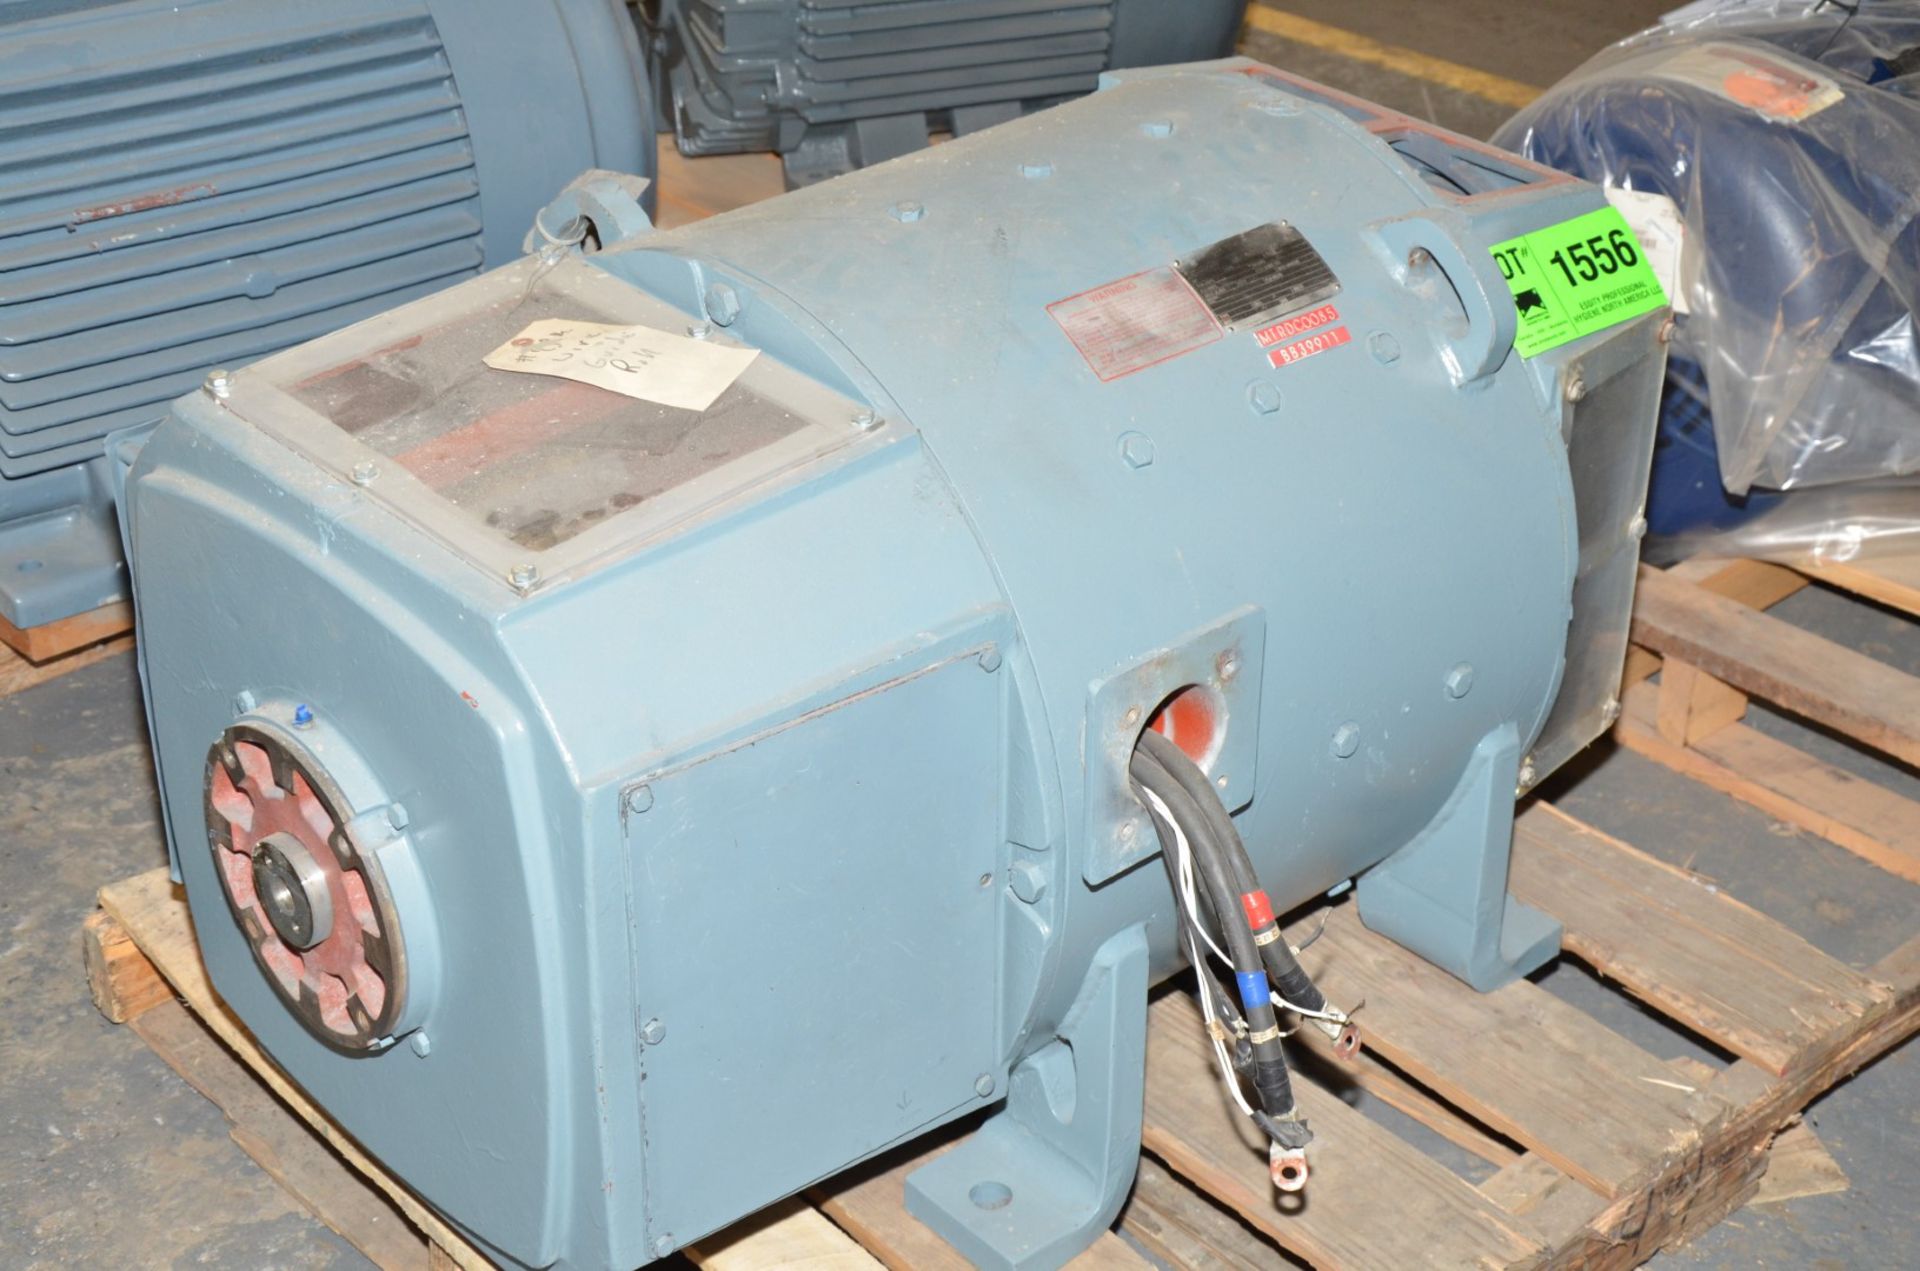 GE 150 HP 1700 RPM ELECTRIC MOTOR [RIGGING FEE FOR LOT #1556 - $50 USD PLUS APPLICABLE TAXES] - Image 2 of 4